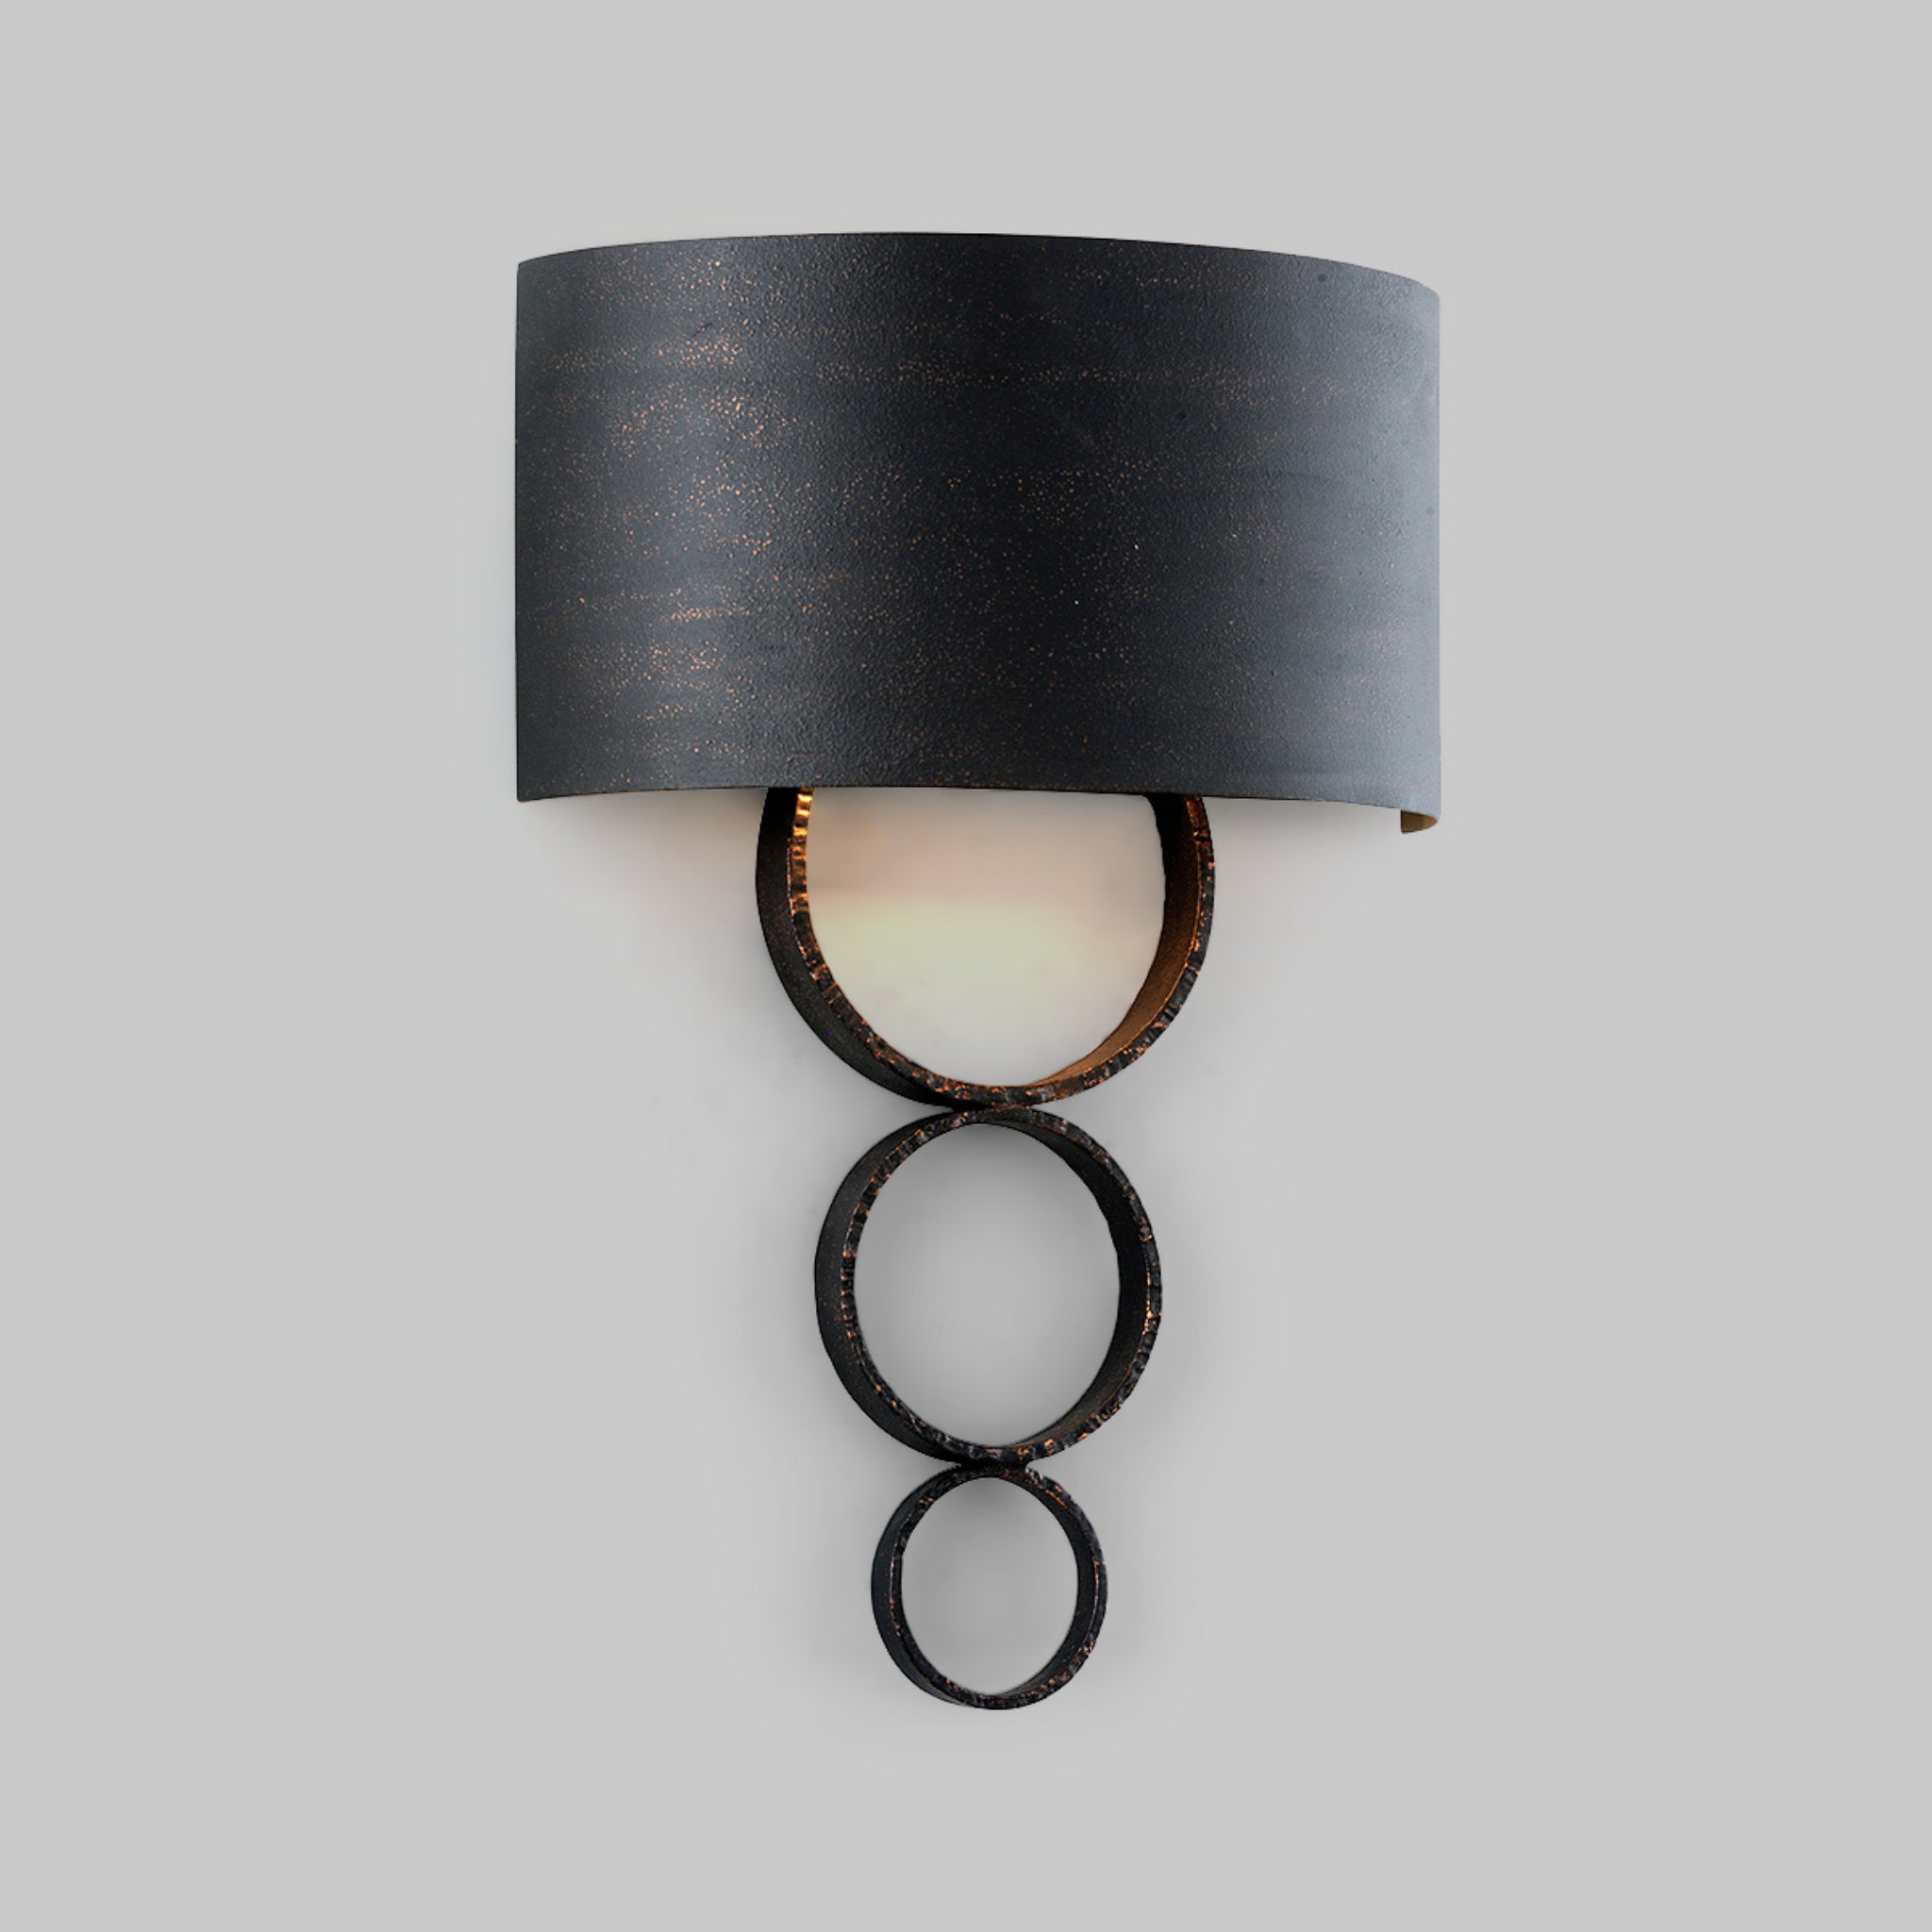 Rivington 2 Light Wall Sconce in Charred Copper